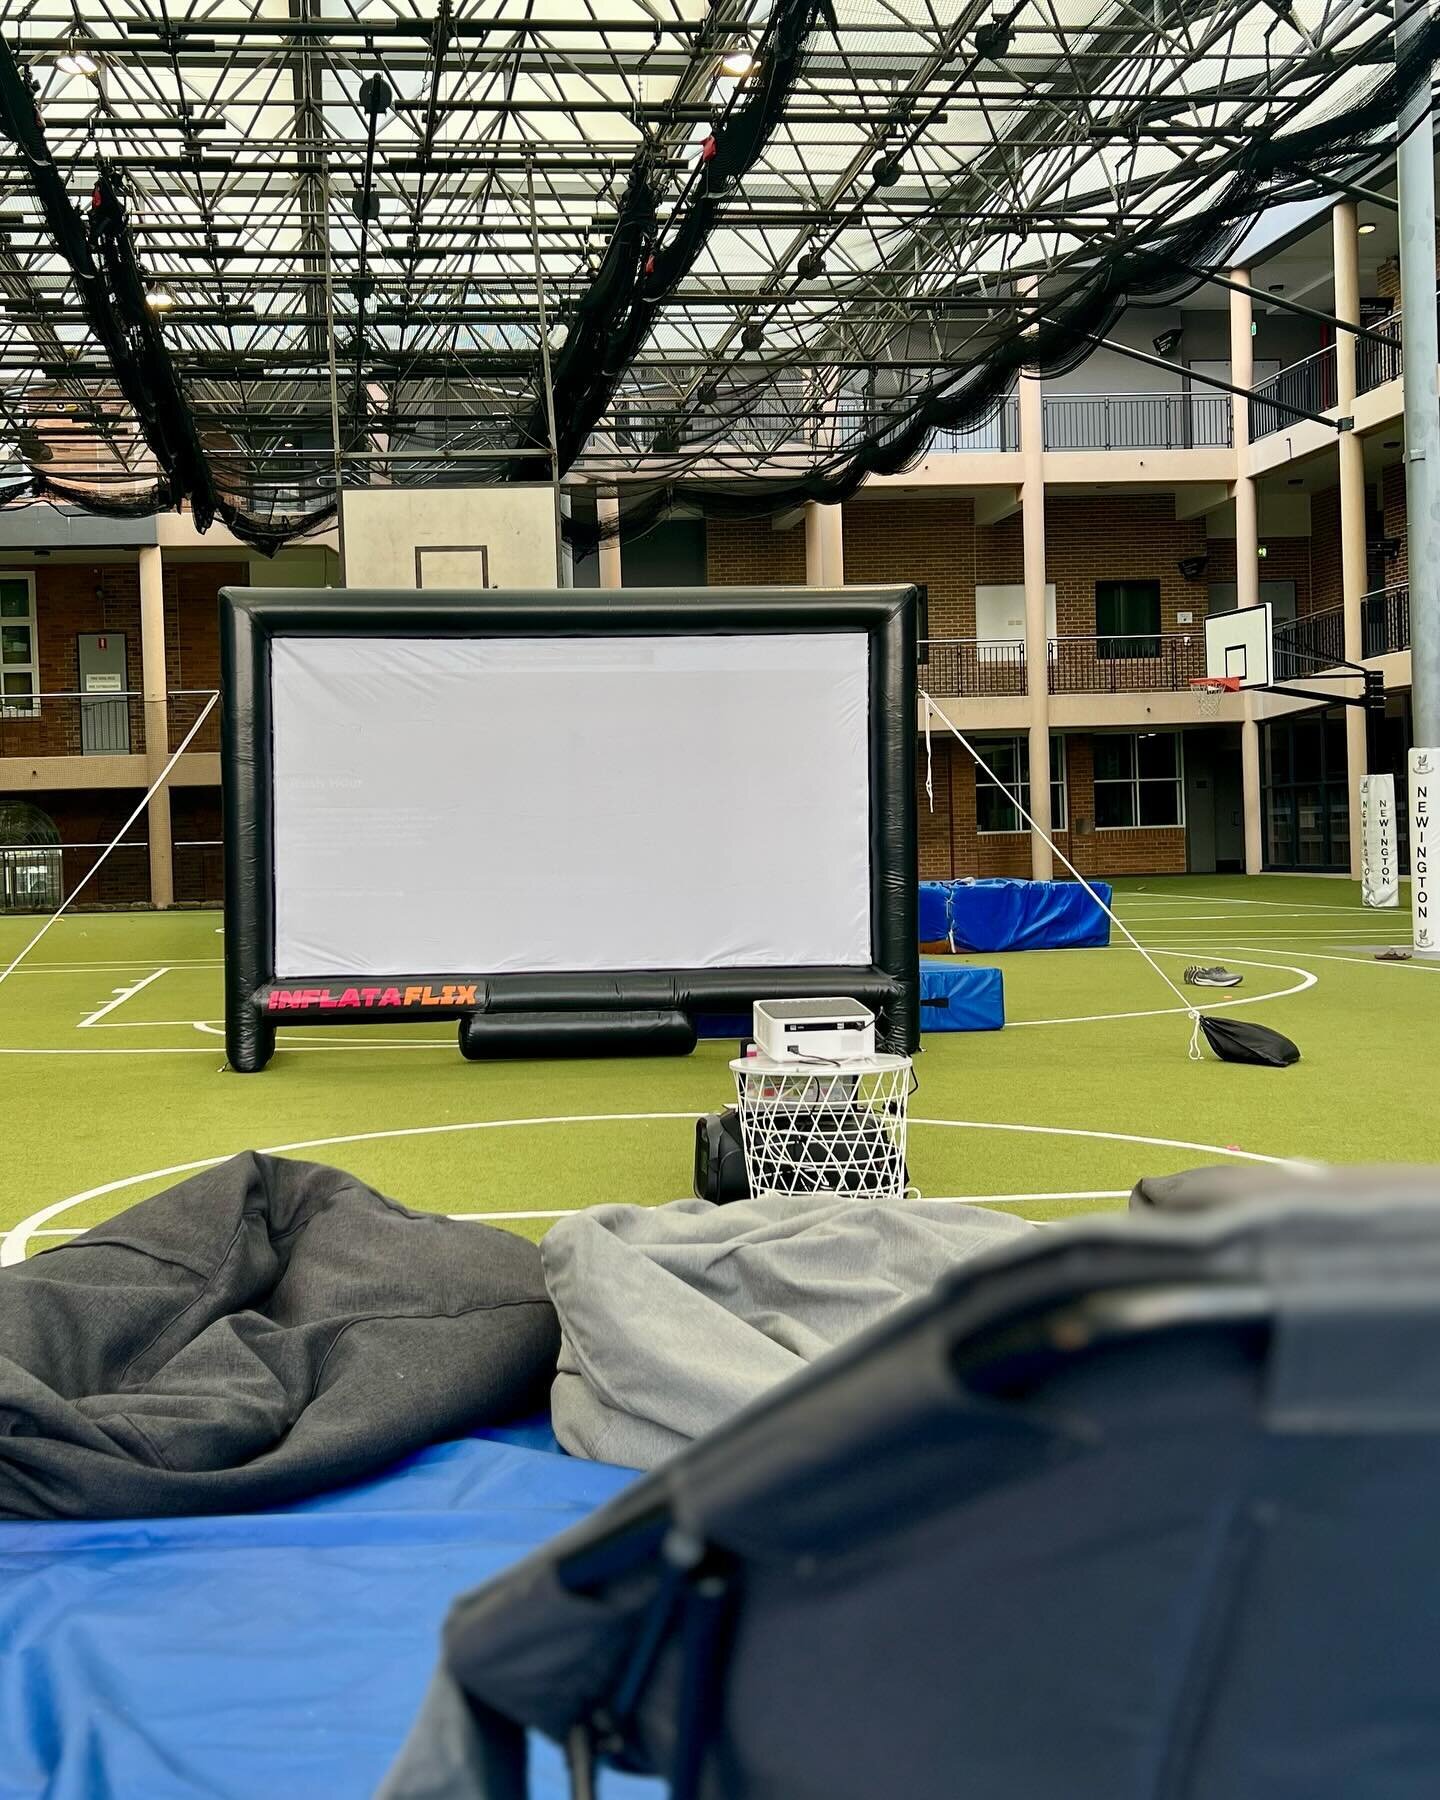 This weekends set up for an all boys College movie night 🍿🎥

#inflataflix #cinemahire #outdoorcinema #grouppackage #movienights